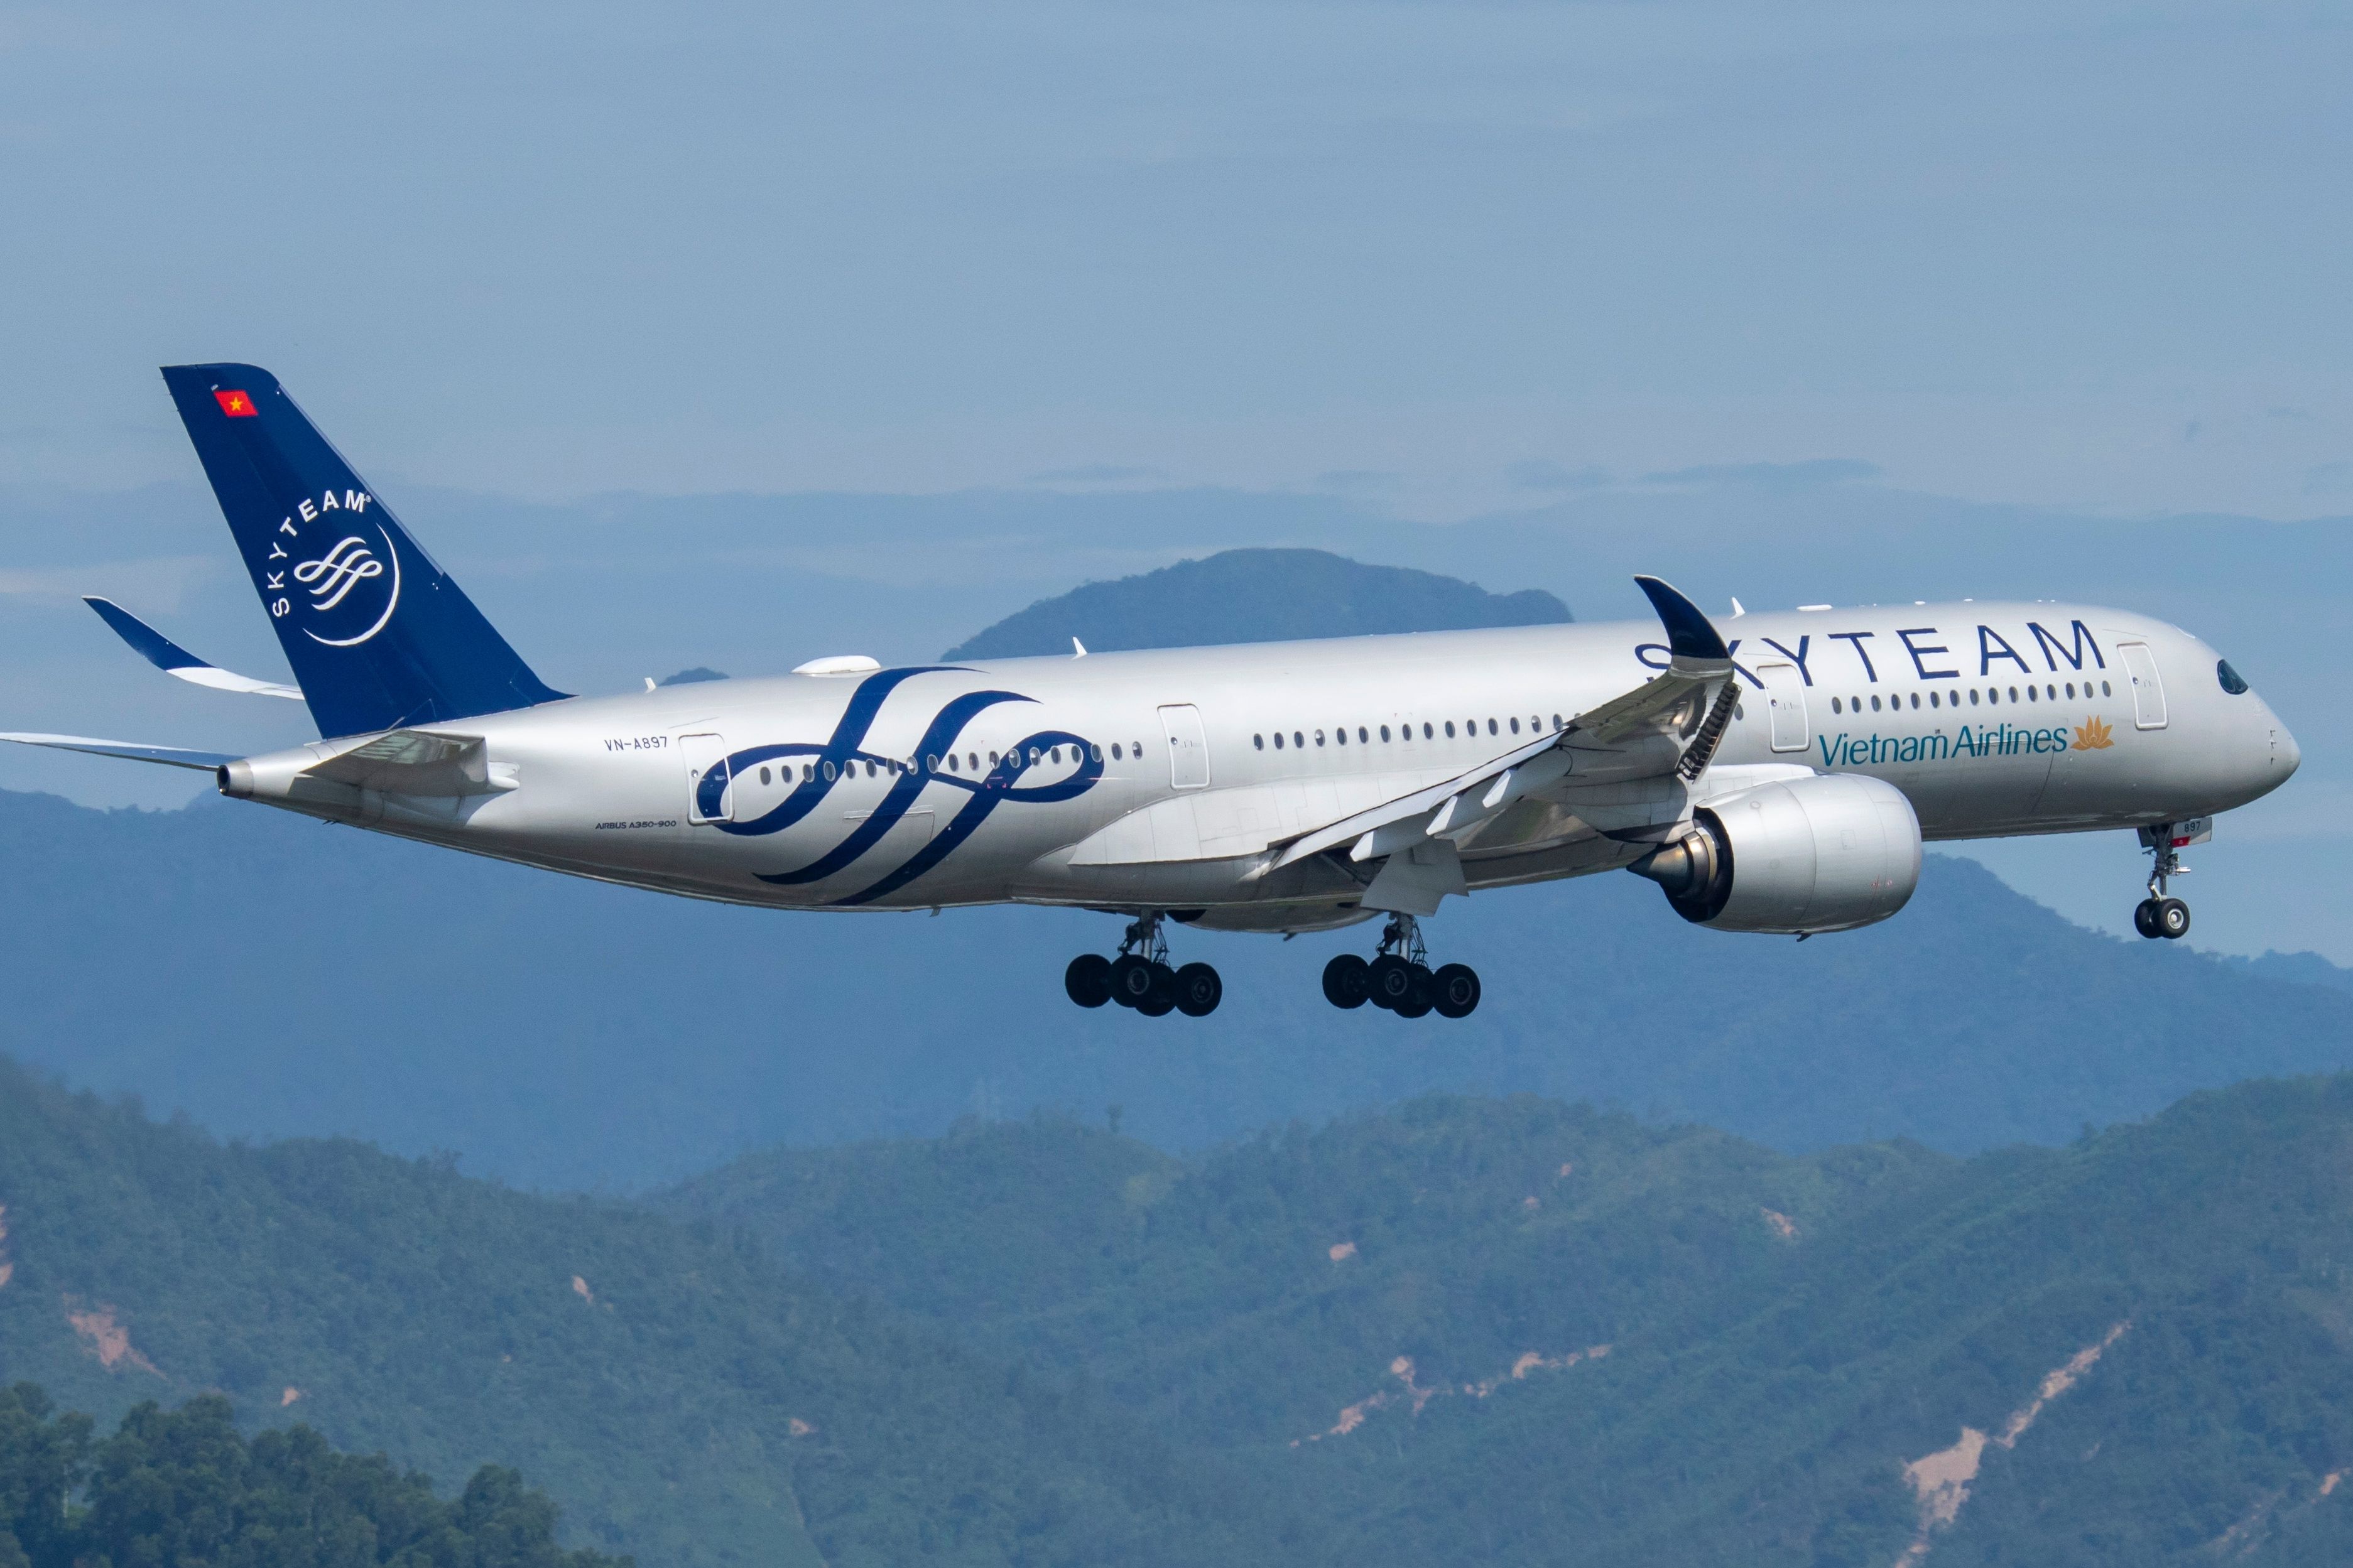 A Vietnam Airlines Airbus A350 in SkyTeam Livery flying in the sky.